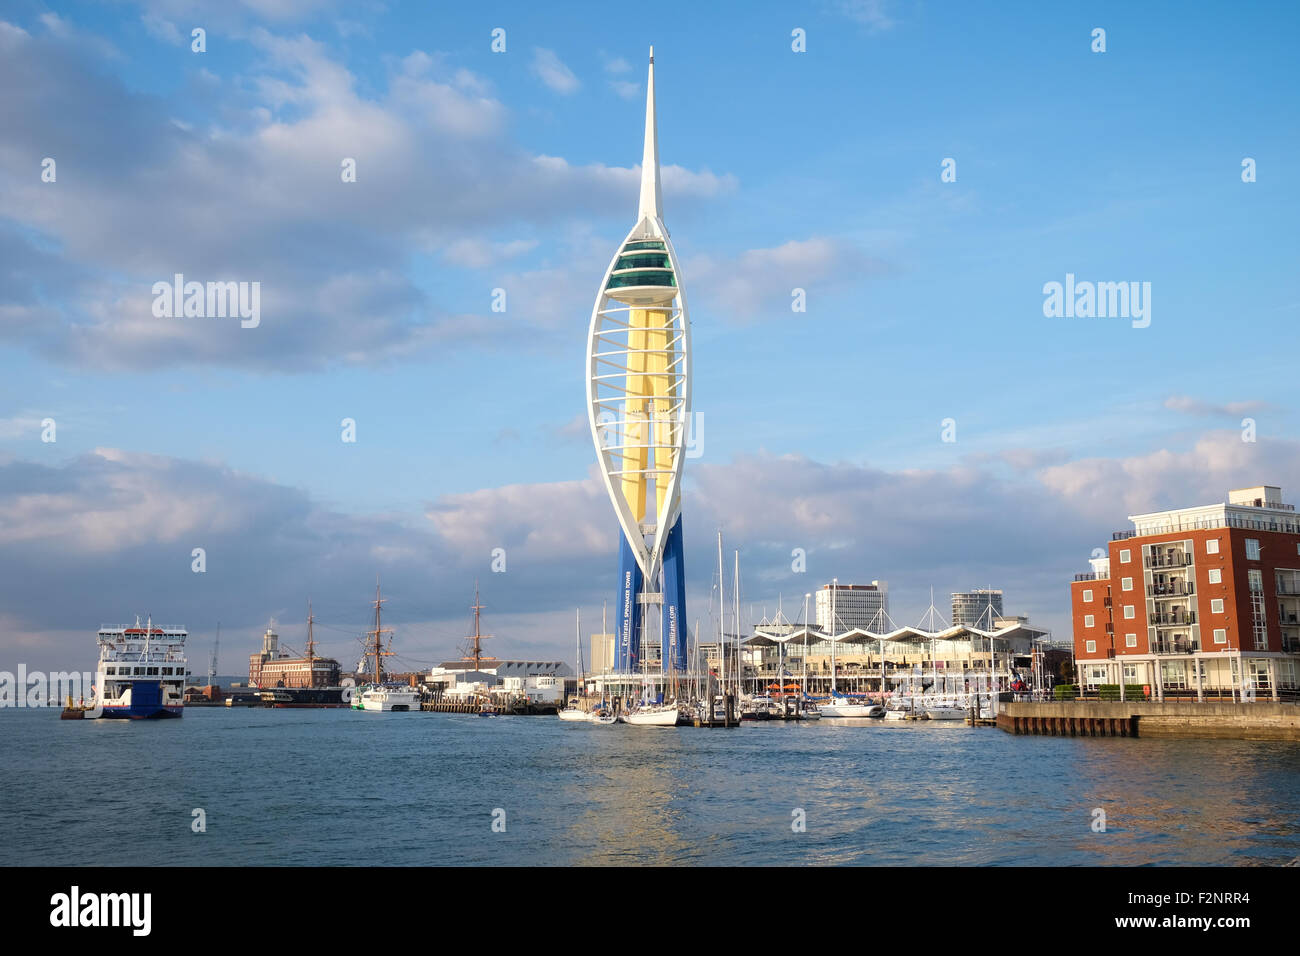 An evening shot of Portsmouth (Emirates) Spinnaker Tower from Old Portsmouth Stock Photo